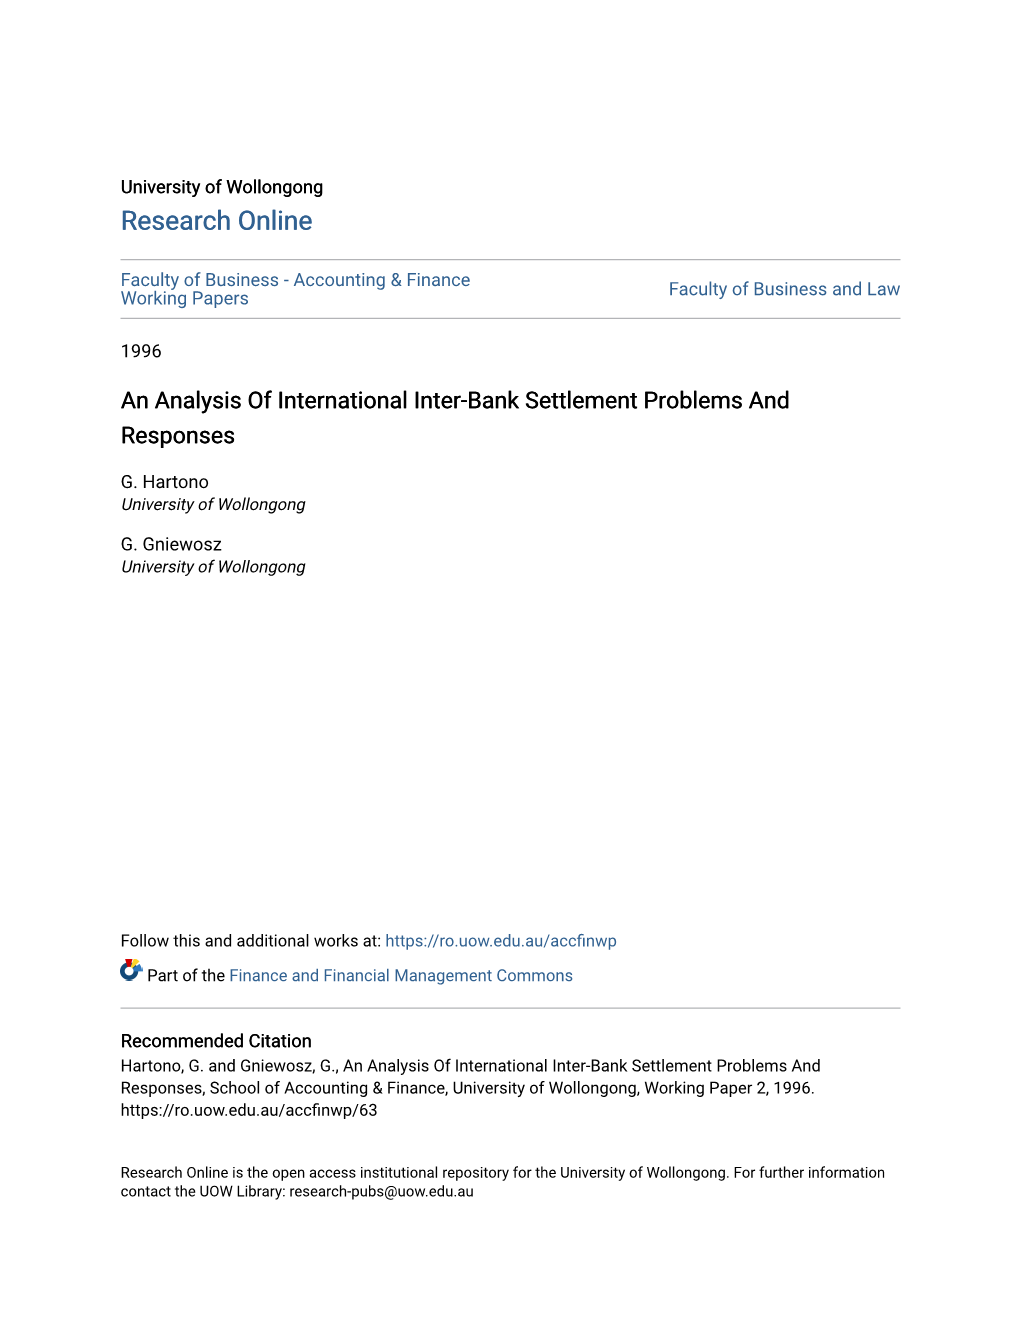 An Analysis of International Inter-Bank Settlement Problems and Responses